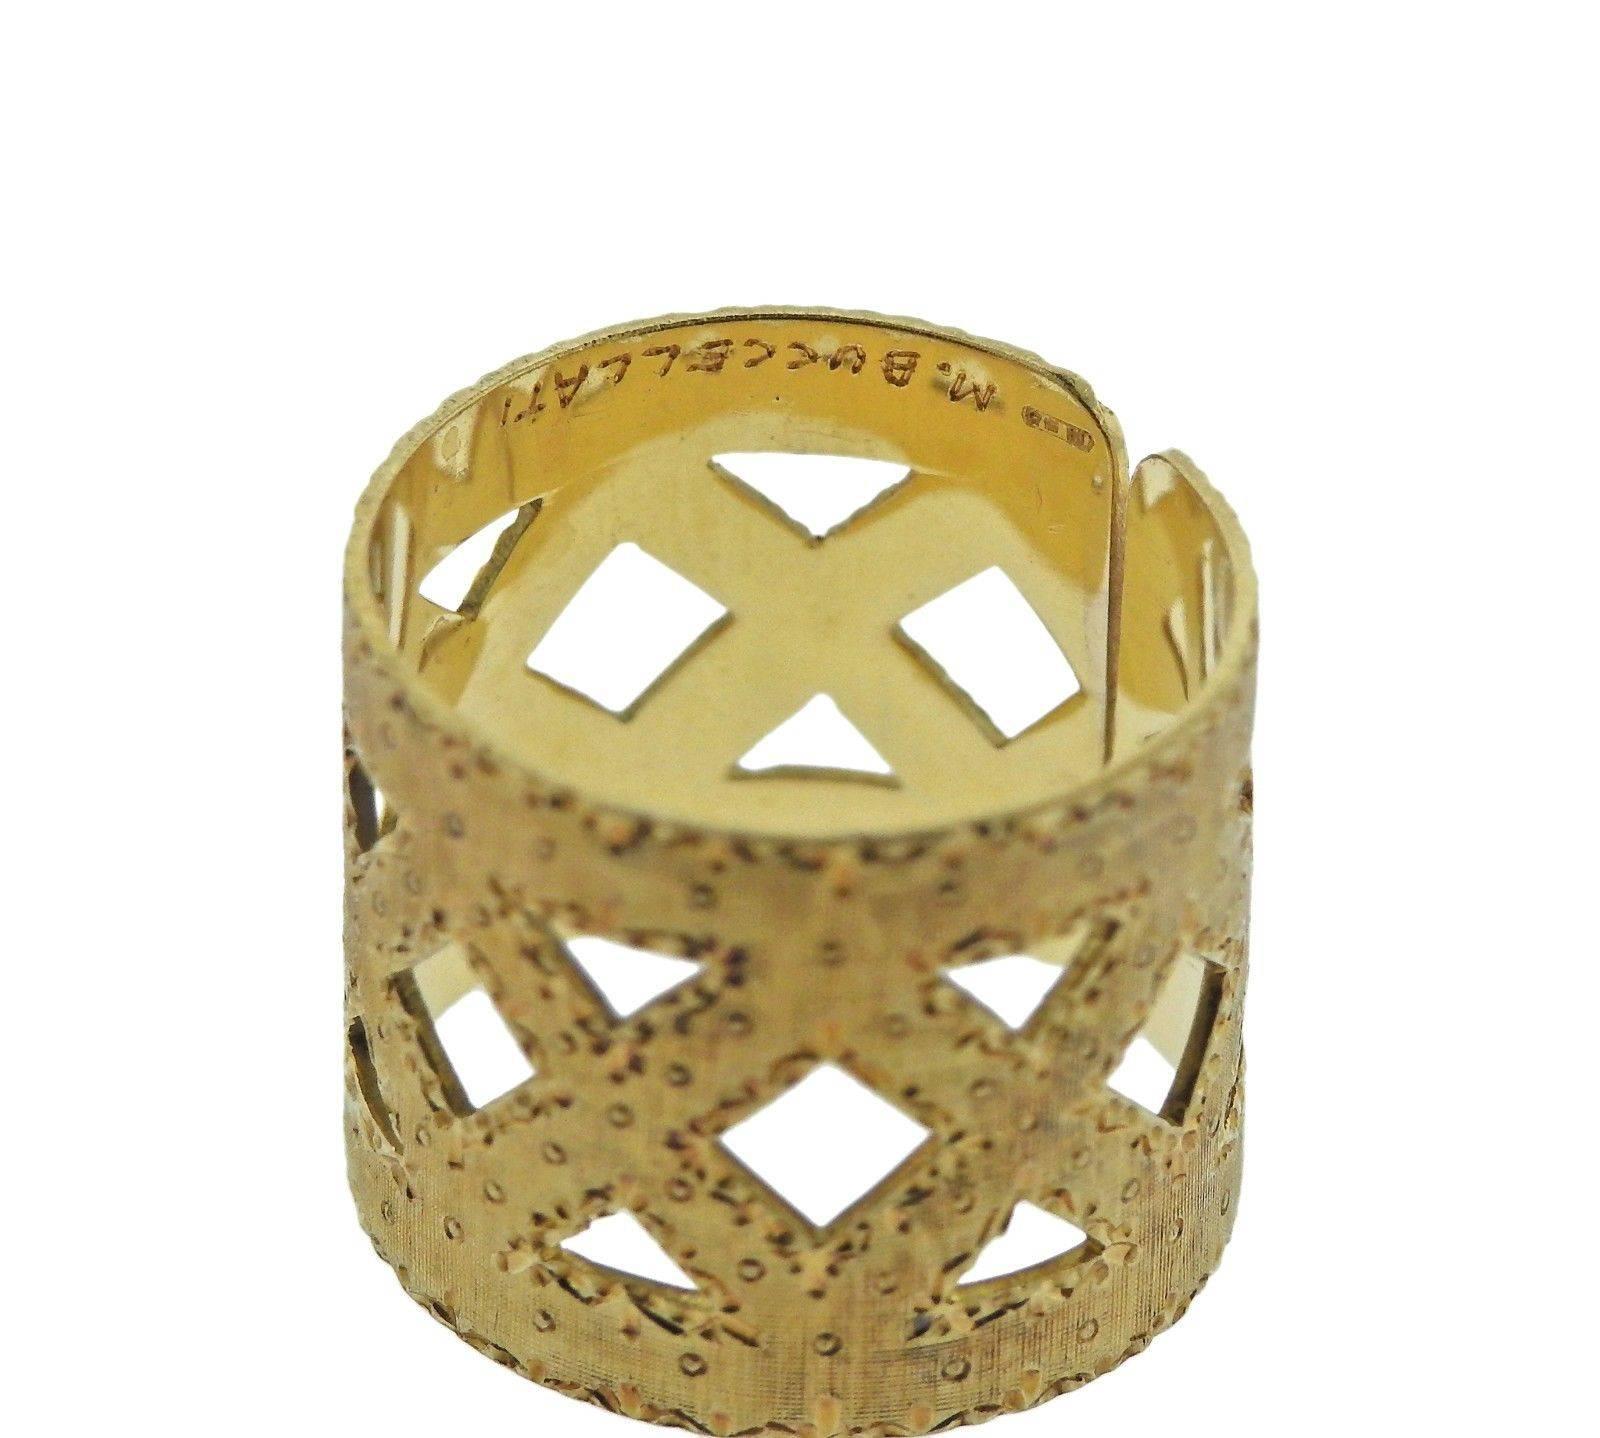 An 18k gold band ring crafted by Mario Buccellati.  The ring is a size 5 1/2 and is 15mm wide.  Marked: M. Buccellati.  The weight of the piece is 6.1 grams.